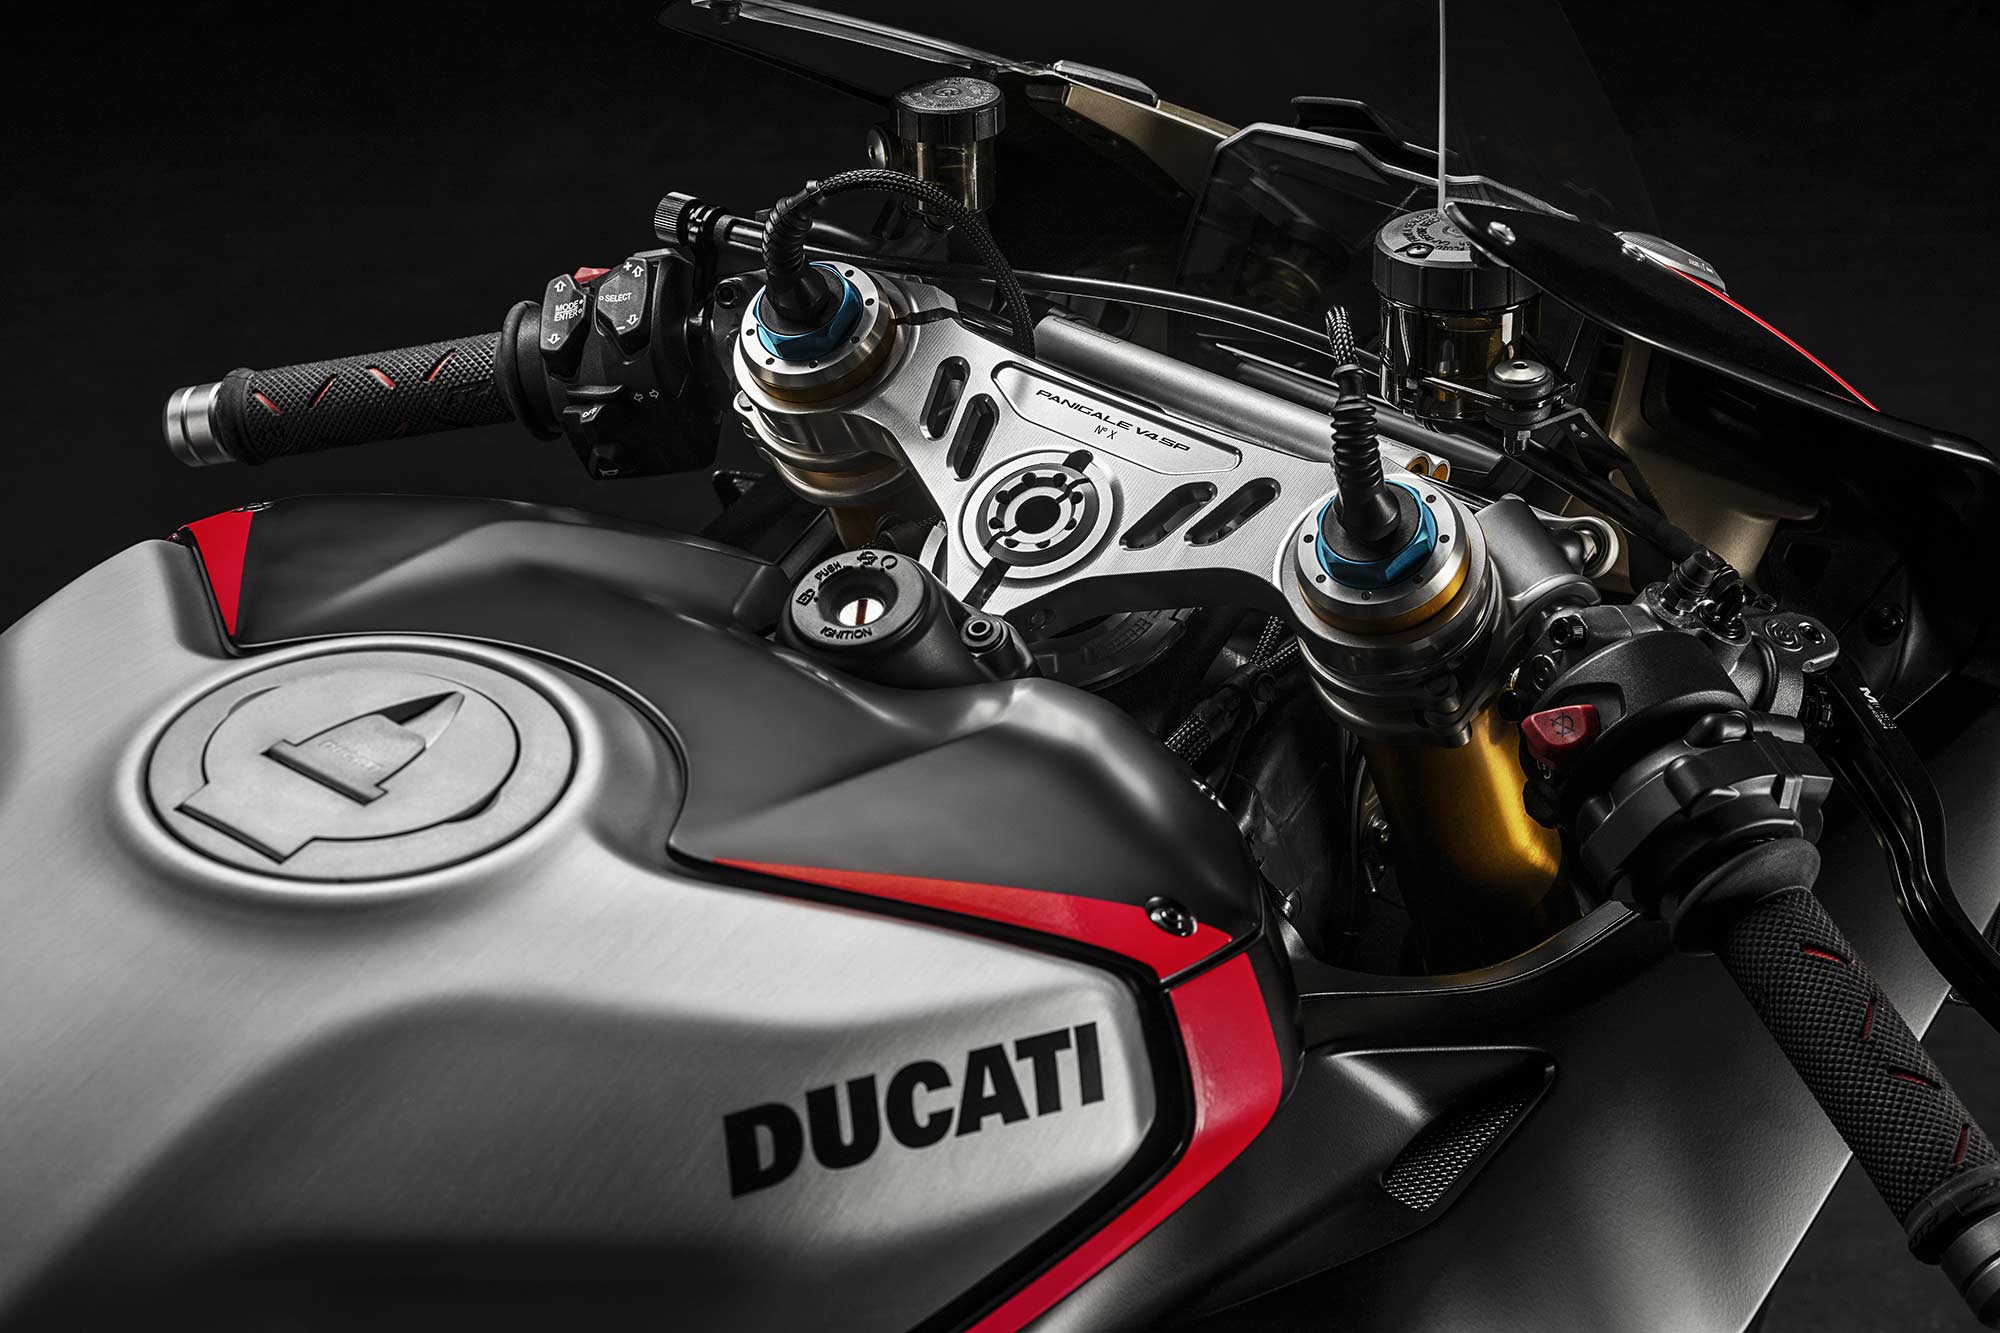 2021 Ducati Panigale V4 Buyer's Guide: Specs, Photos, Price